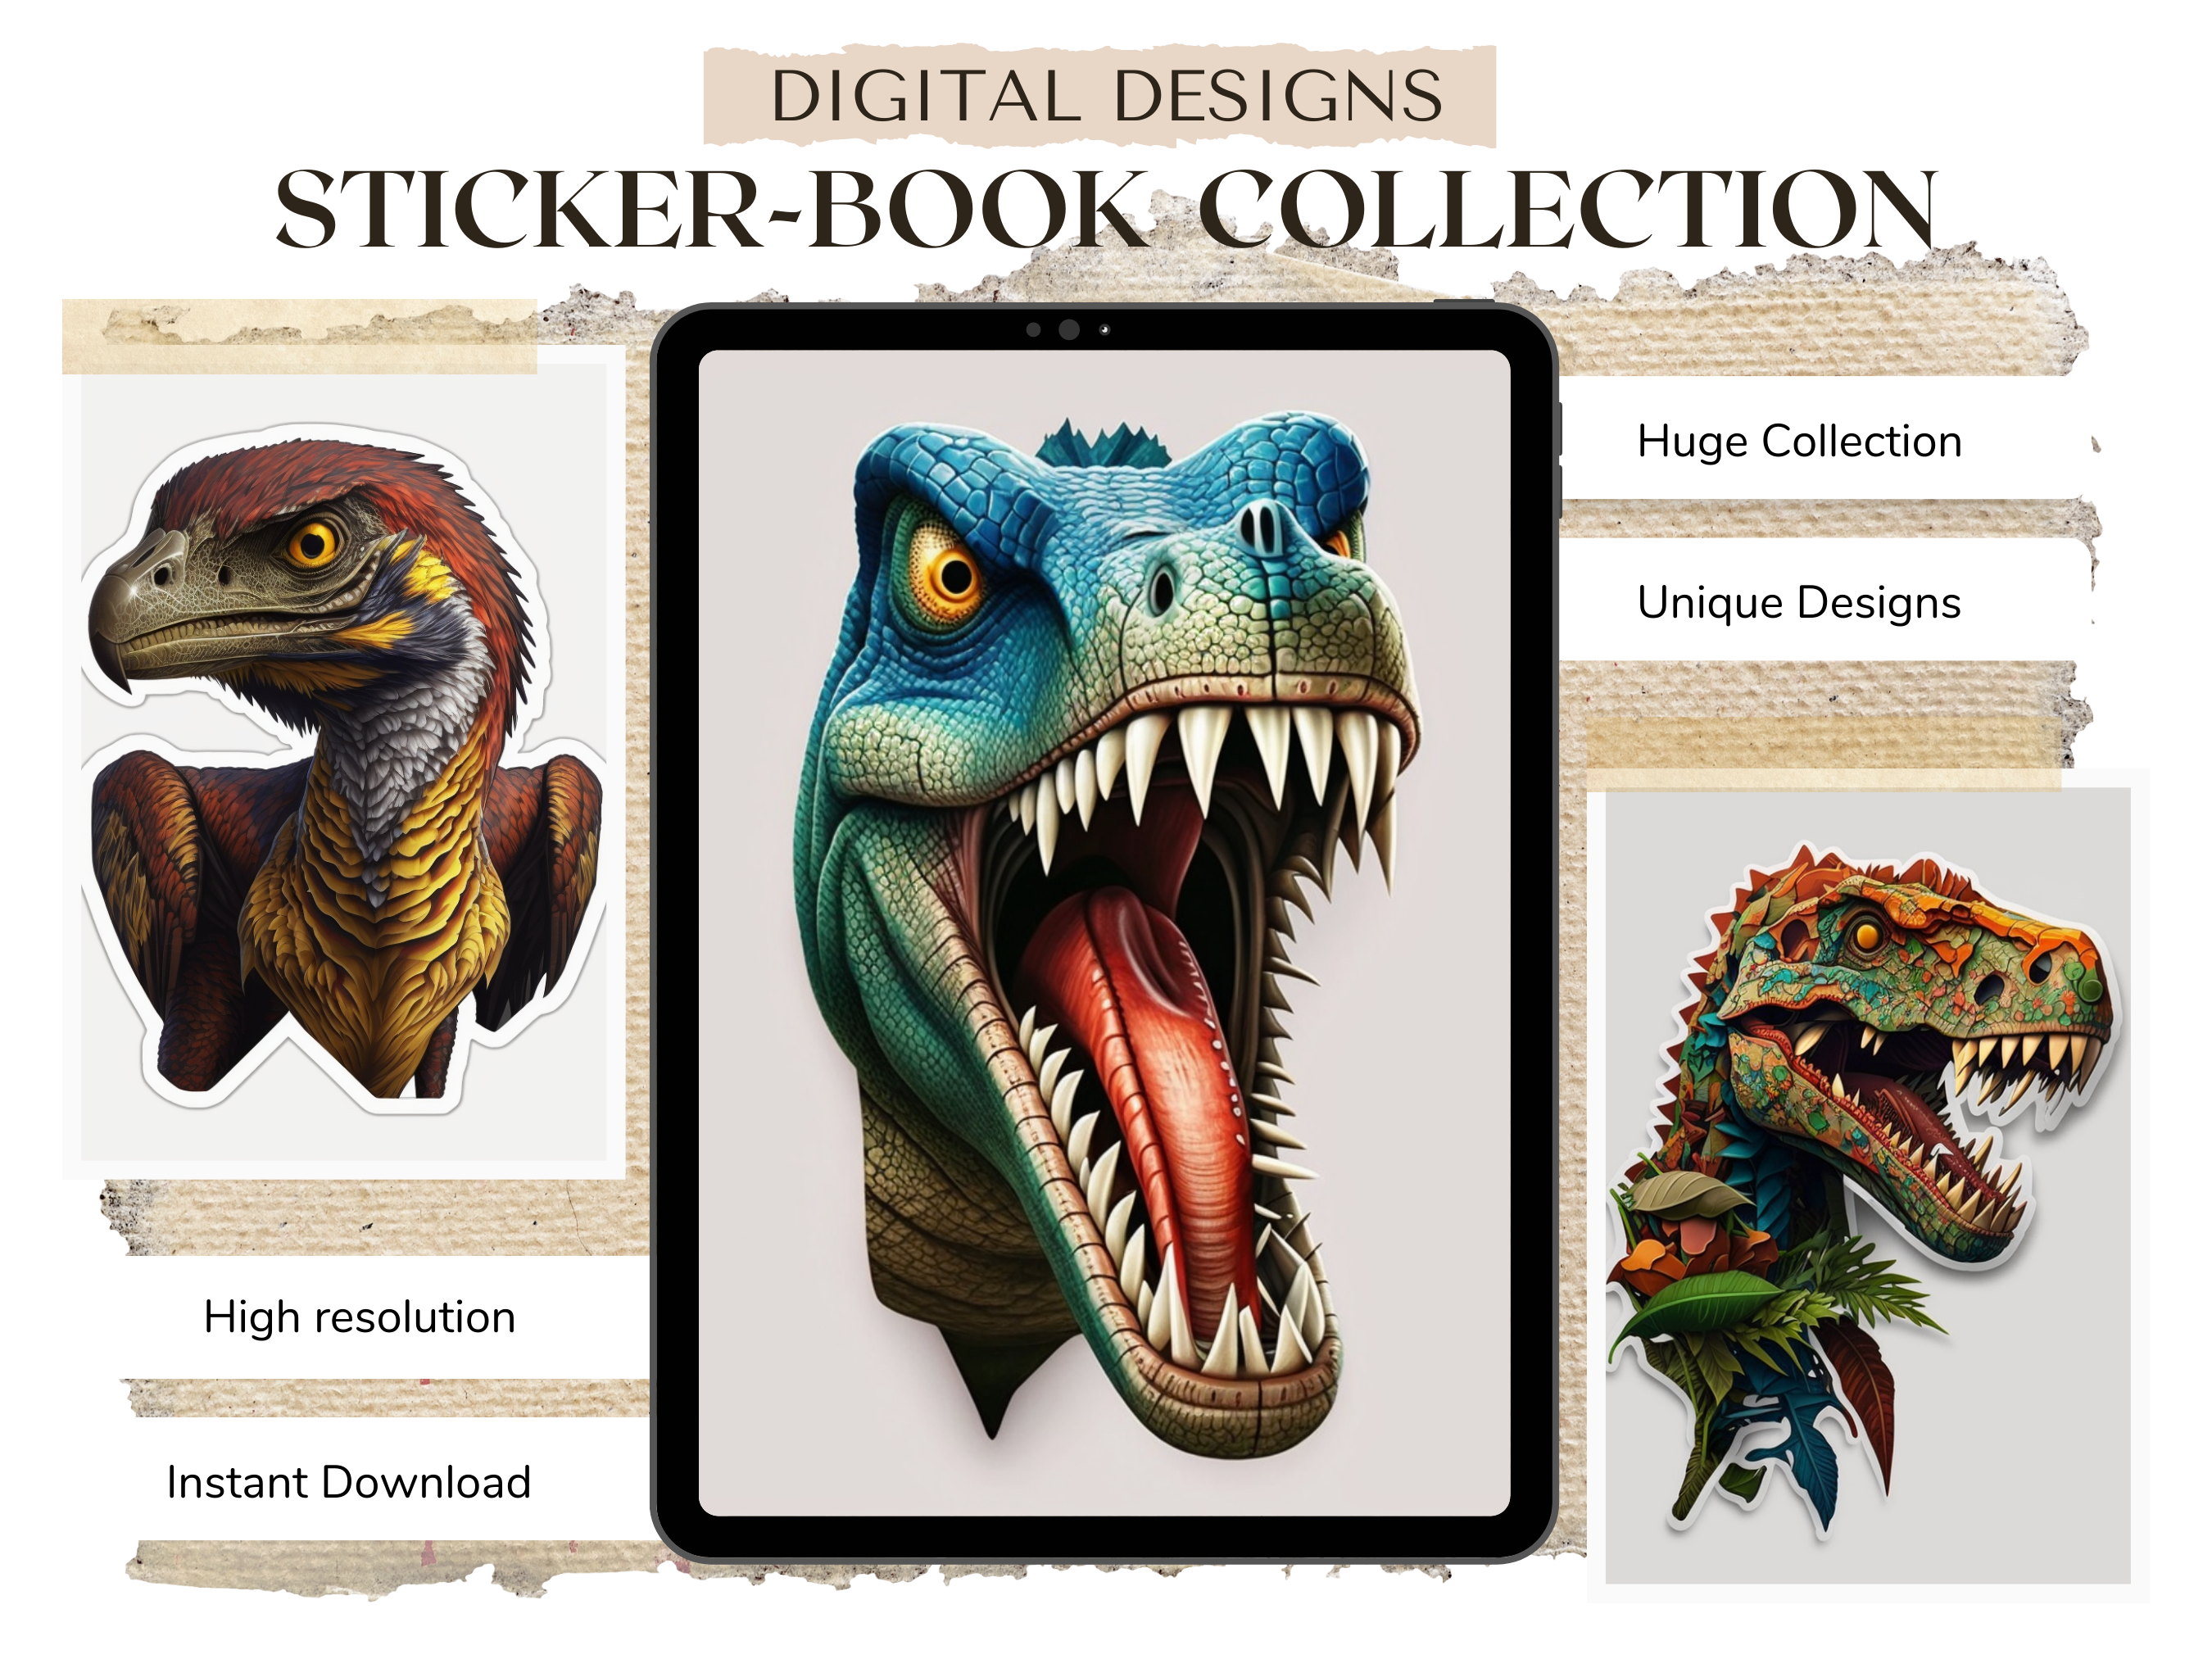 Dinosaurs Digital Downloadable Sticker Designs | PDF Reference Designs for Tattoos